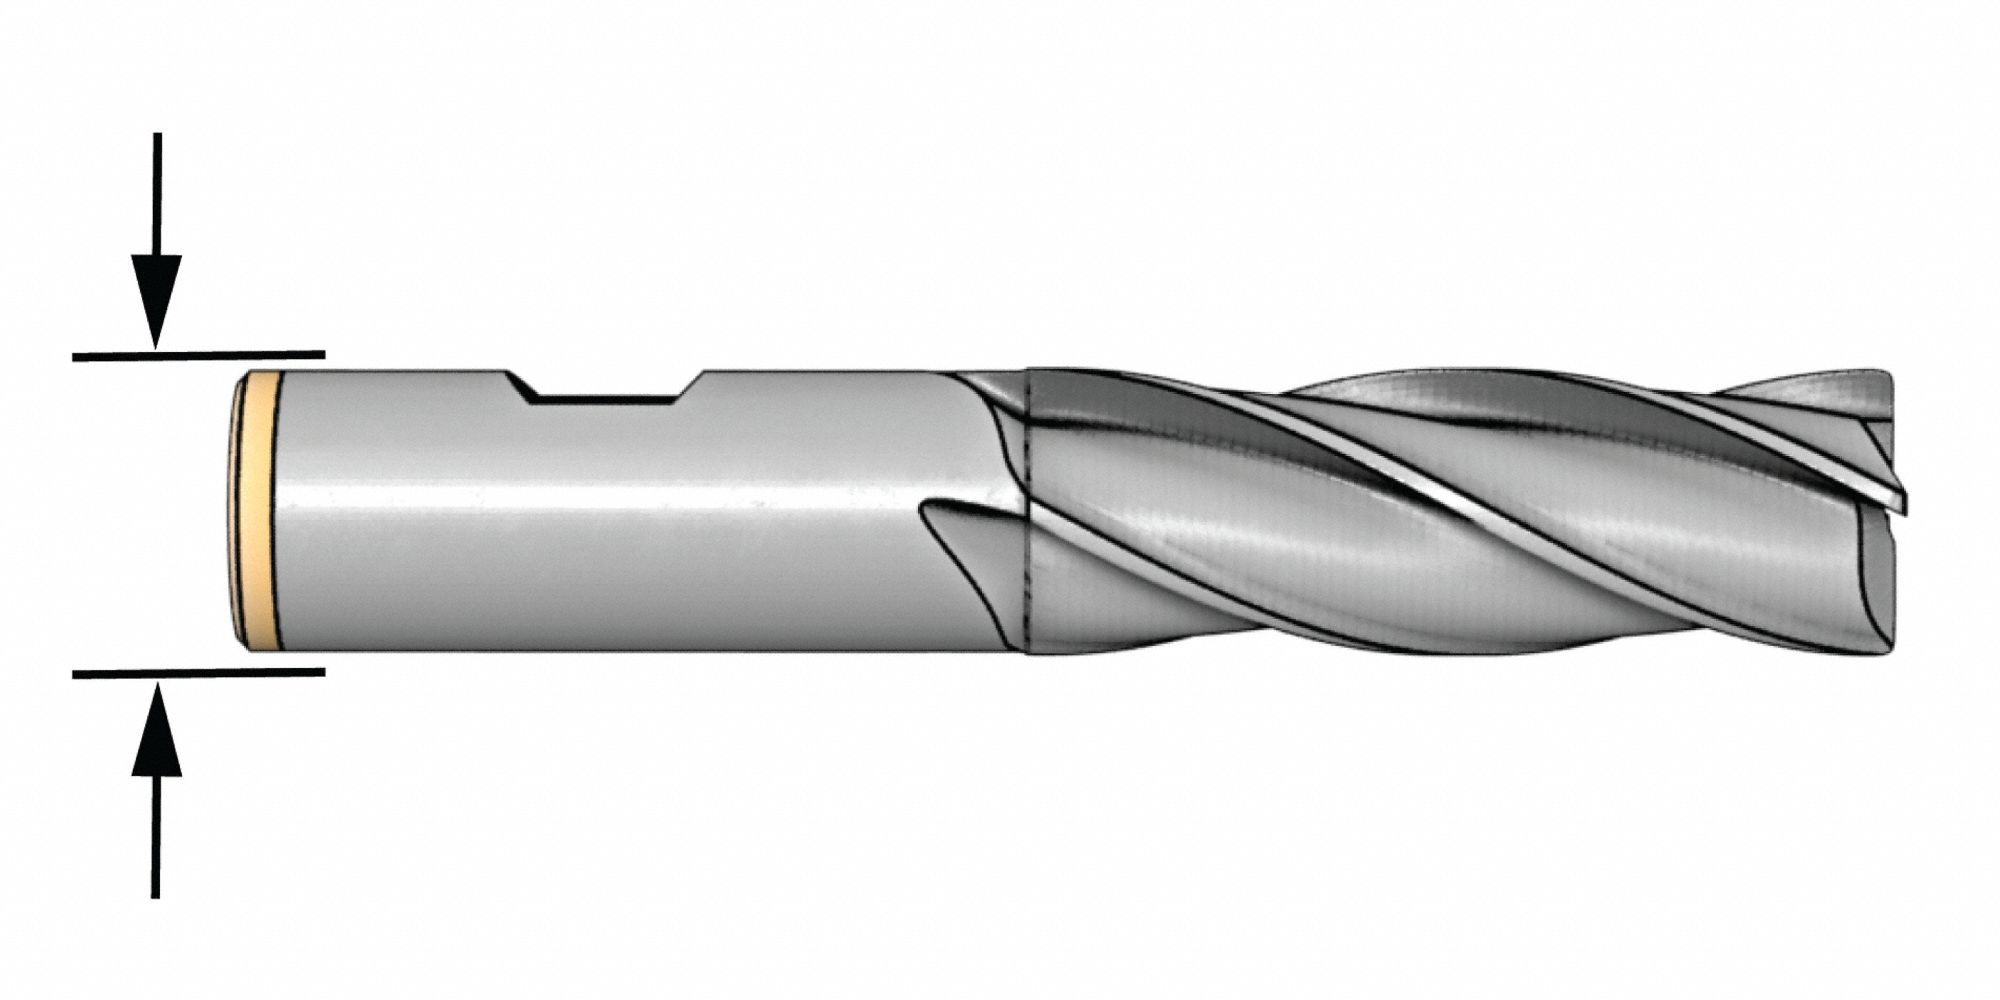 5//64 in.4 Flutes TiCN End Mill